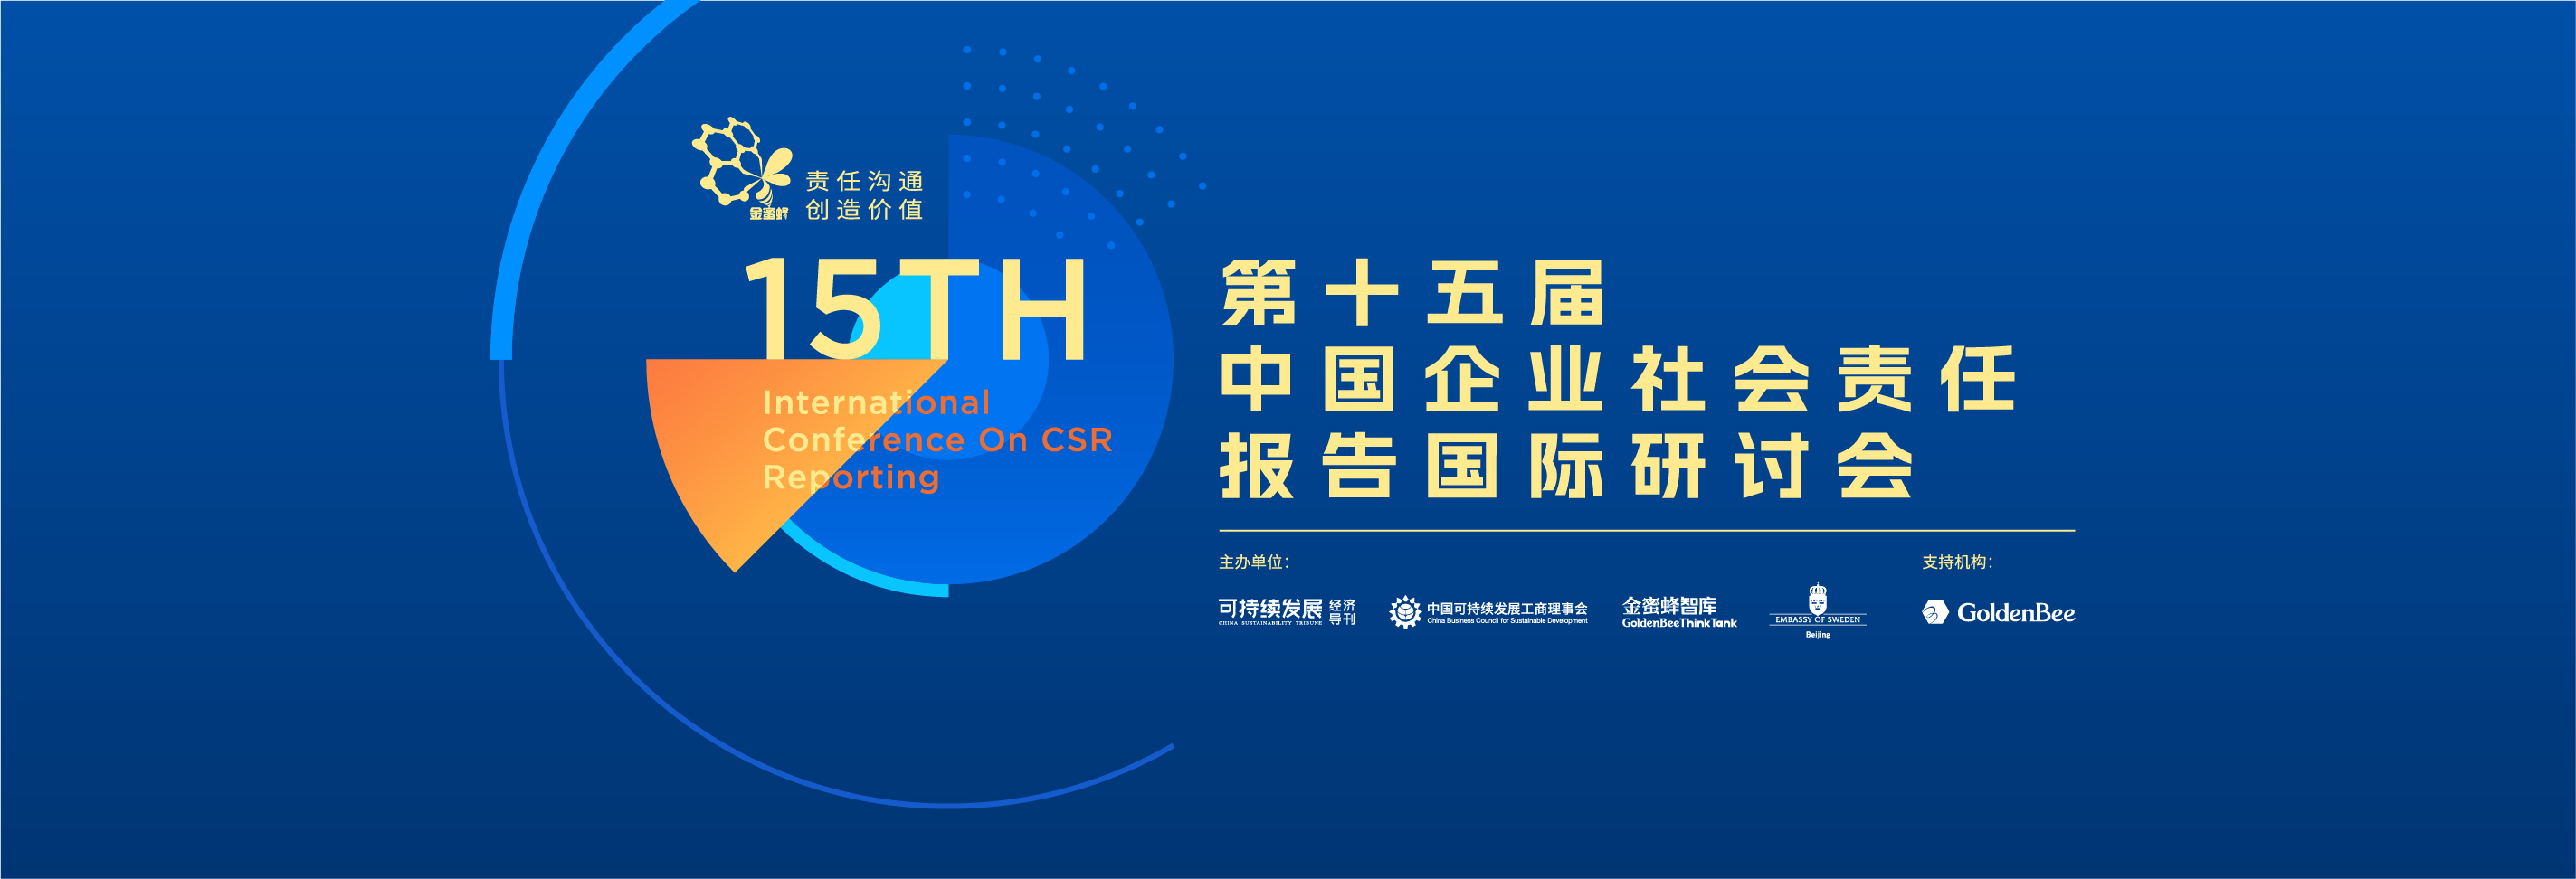 Reminder: 15th International Conference on CSR Reporting in China on 2 December